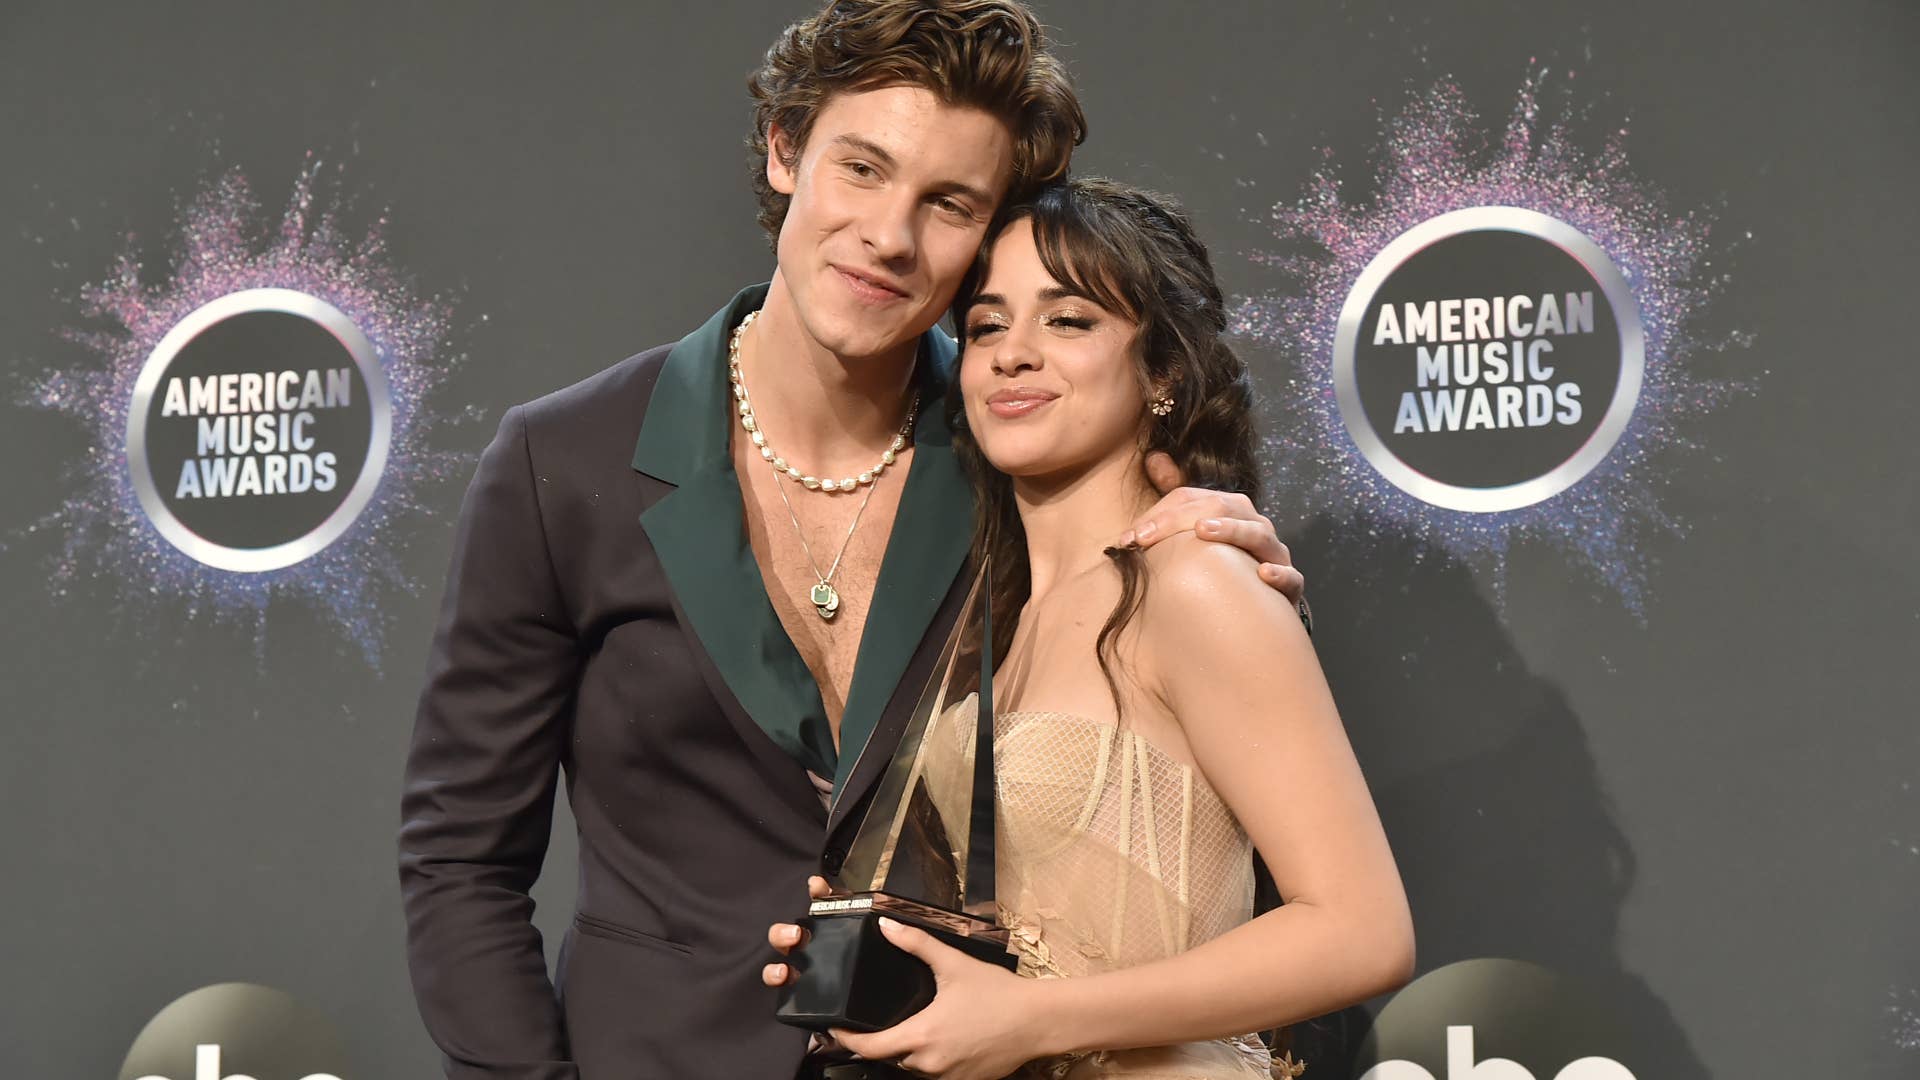 Shawn Mendes and Camila Cabello pose for photo together.